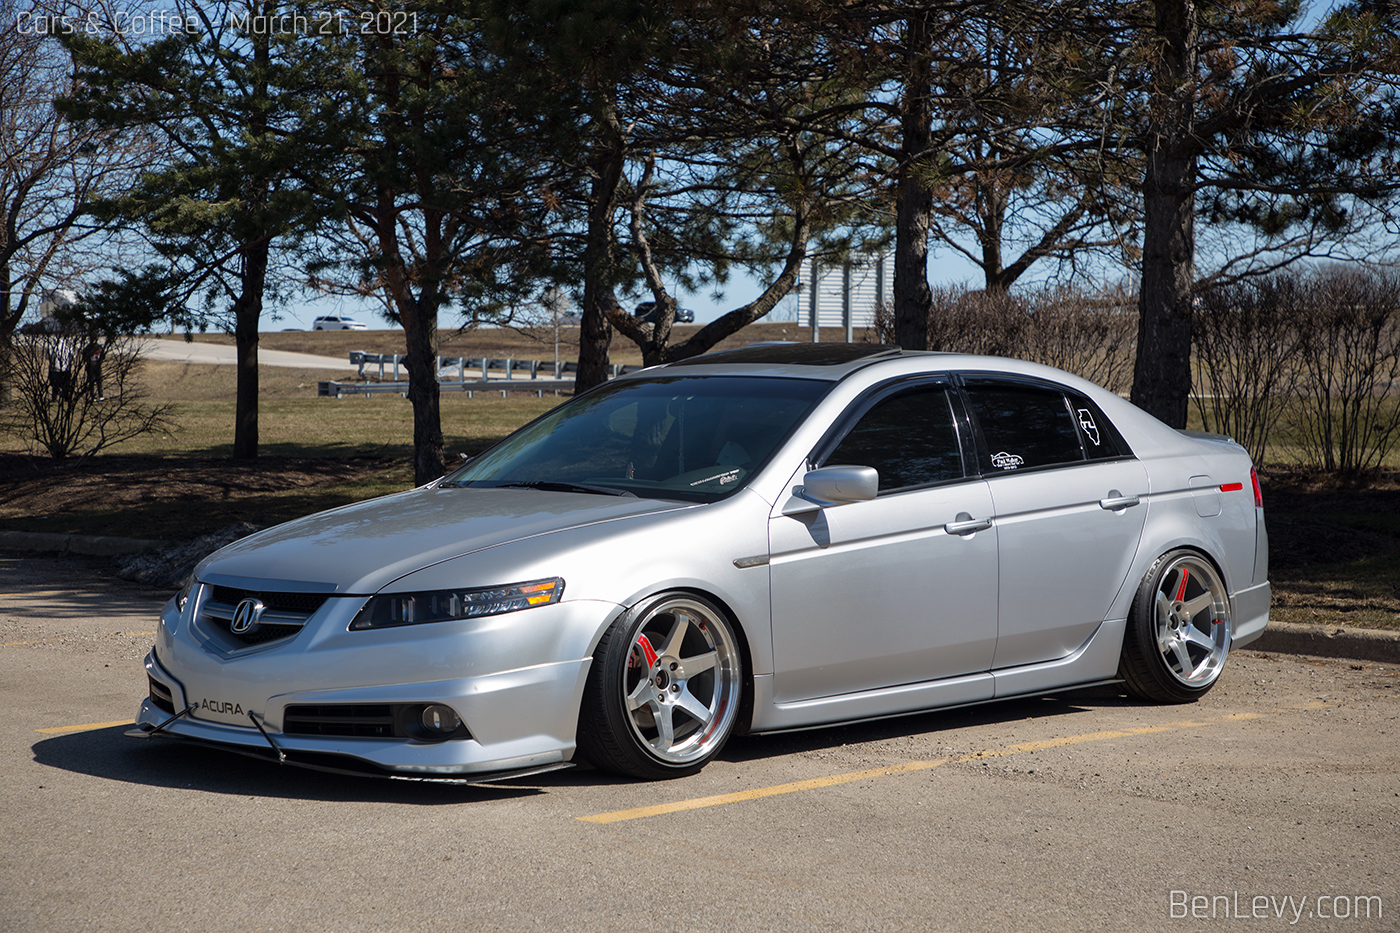 Silver Acura TL at JDM Cars & Coffee